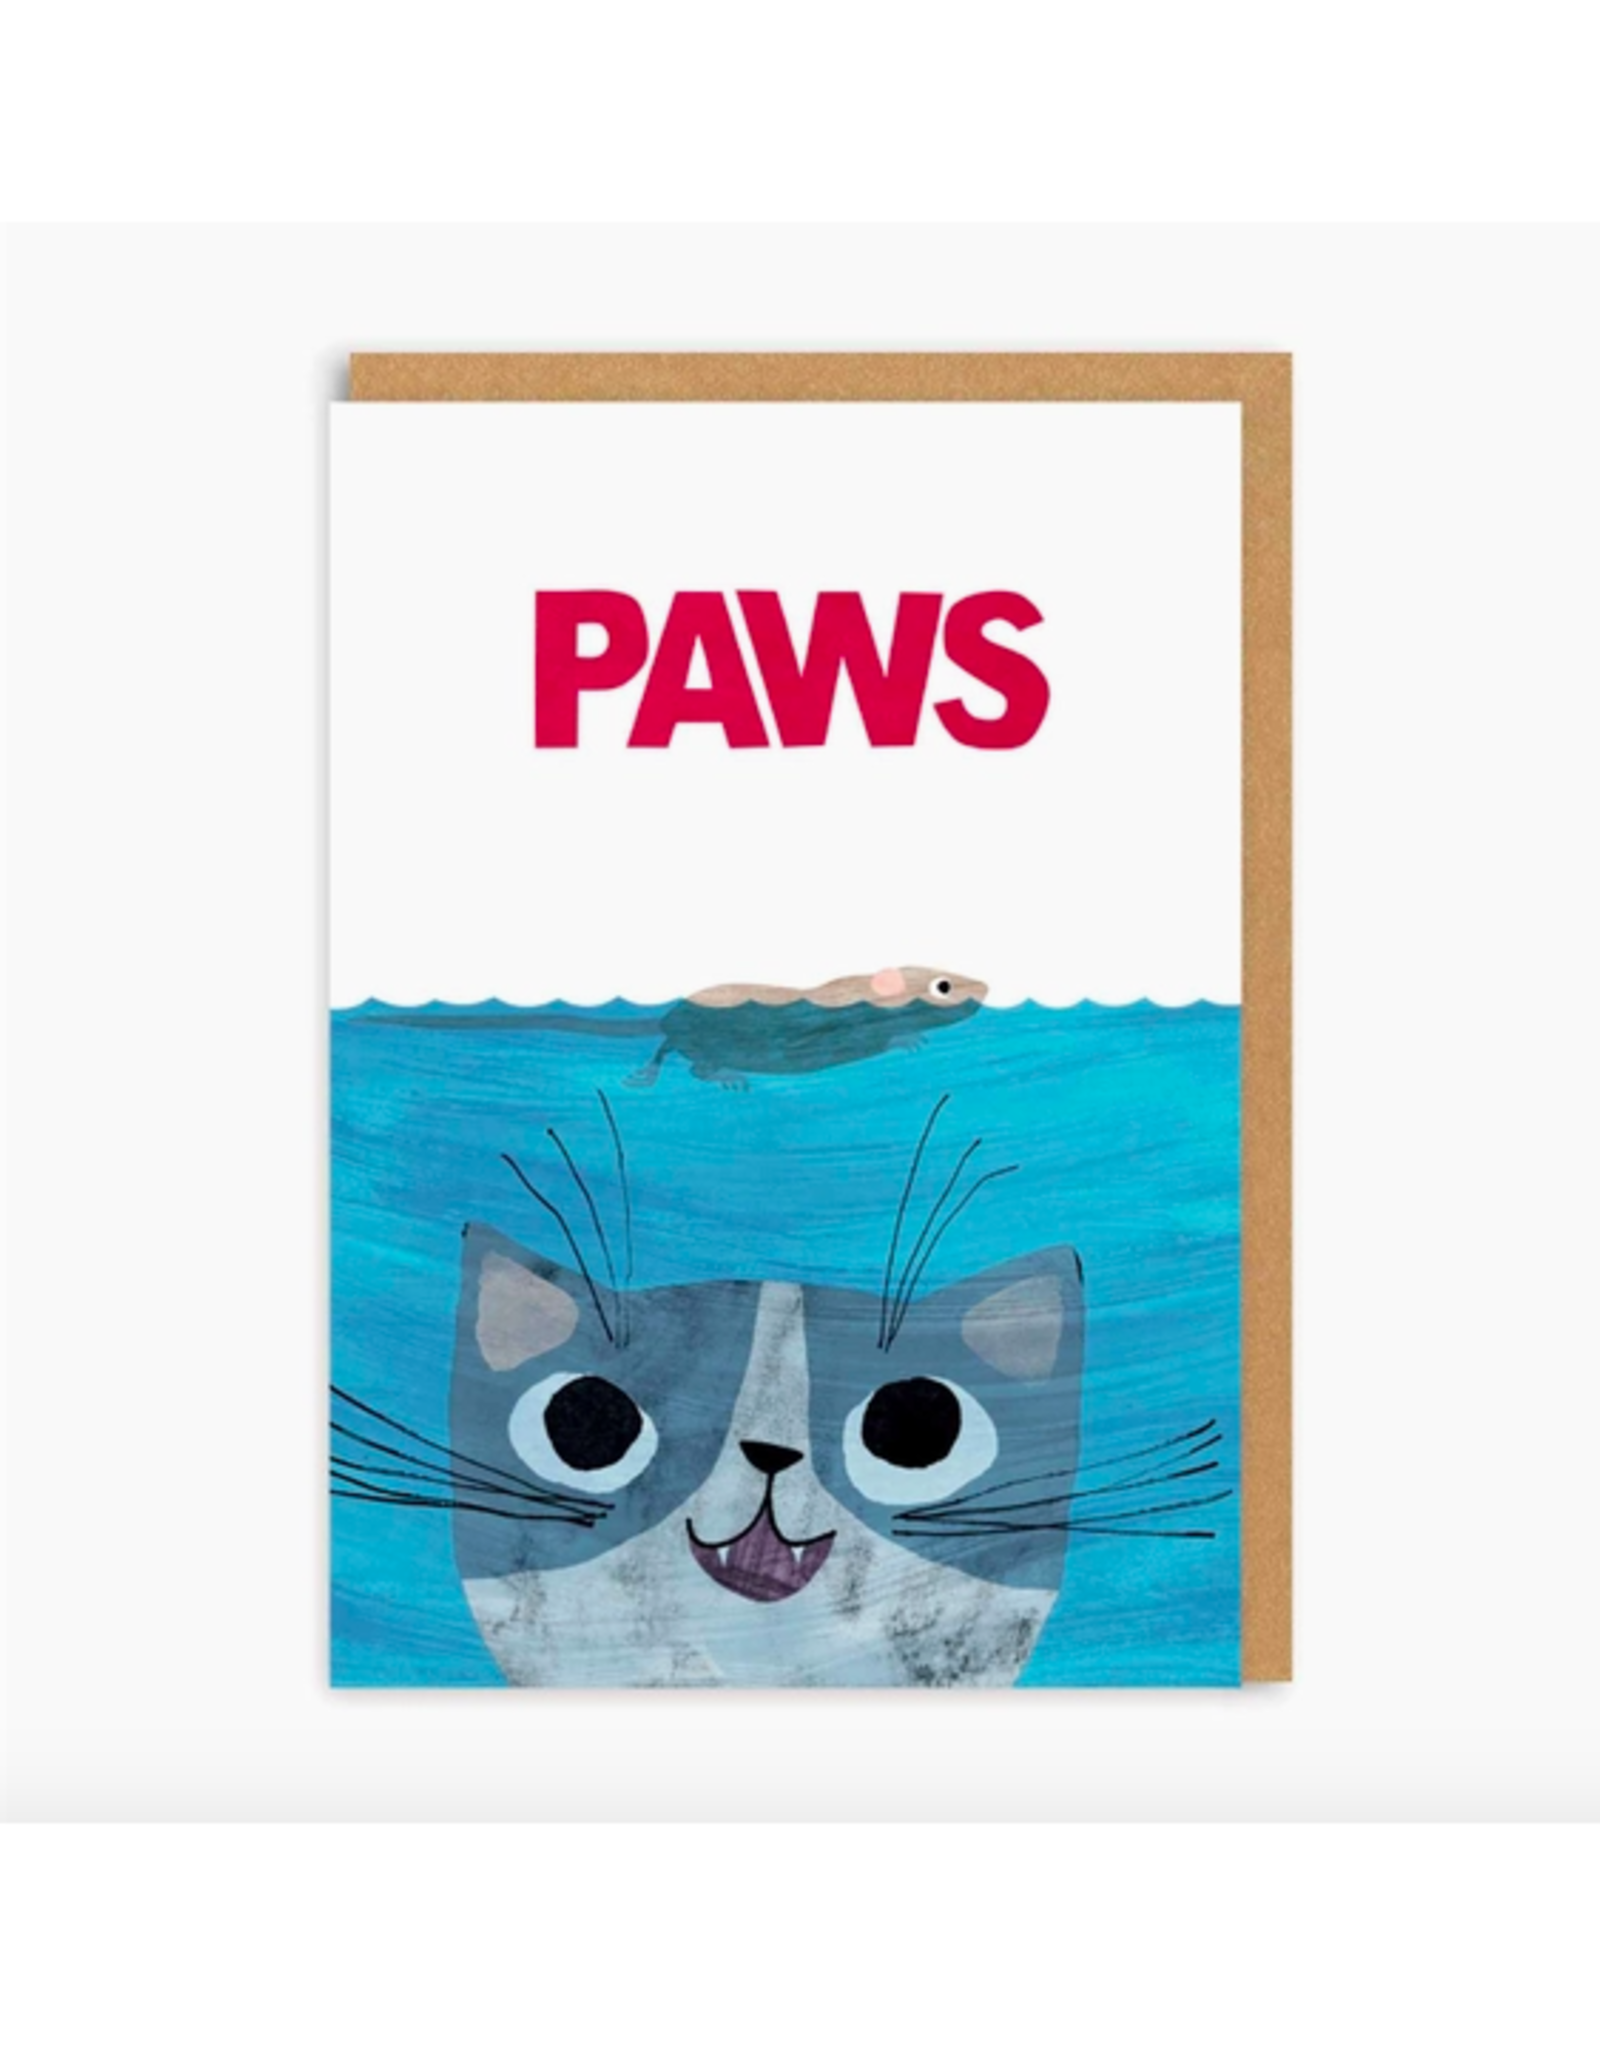 Paws / Jaws Greeting Card